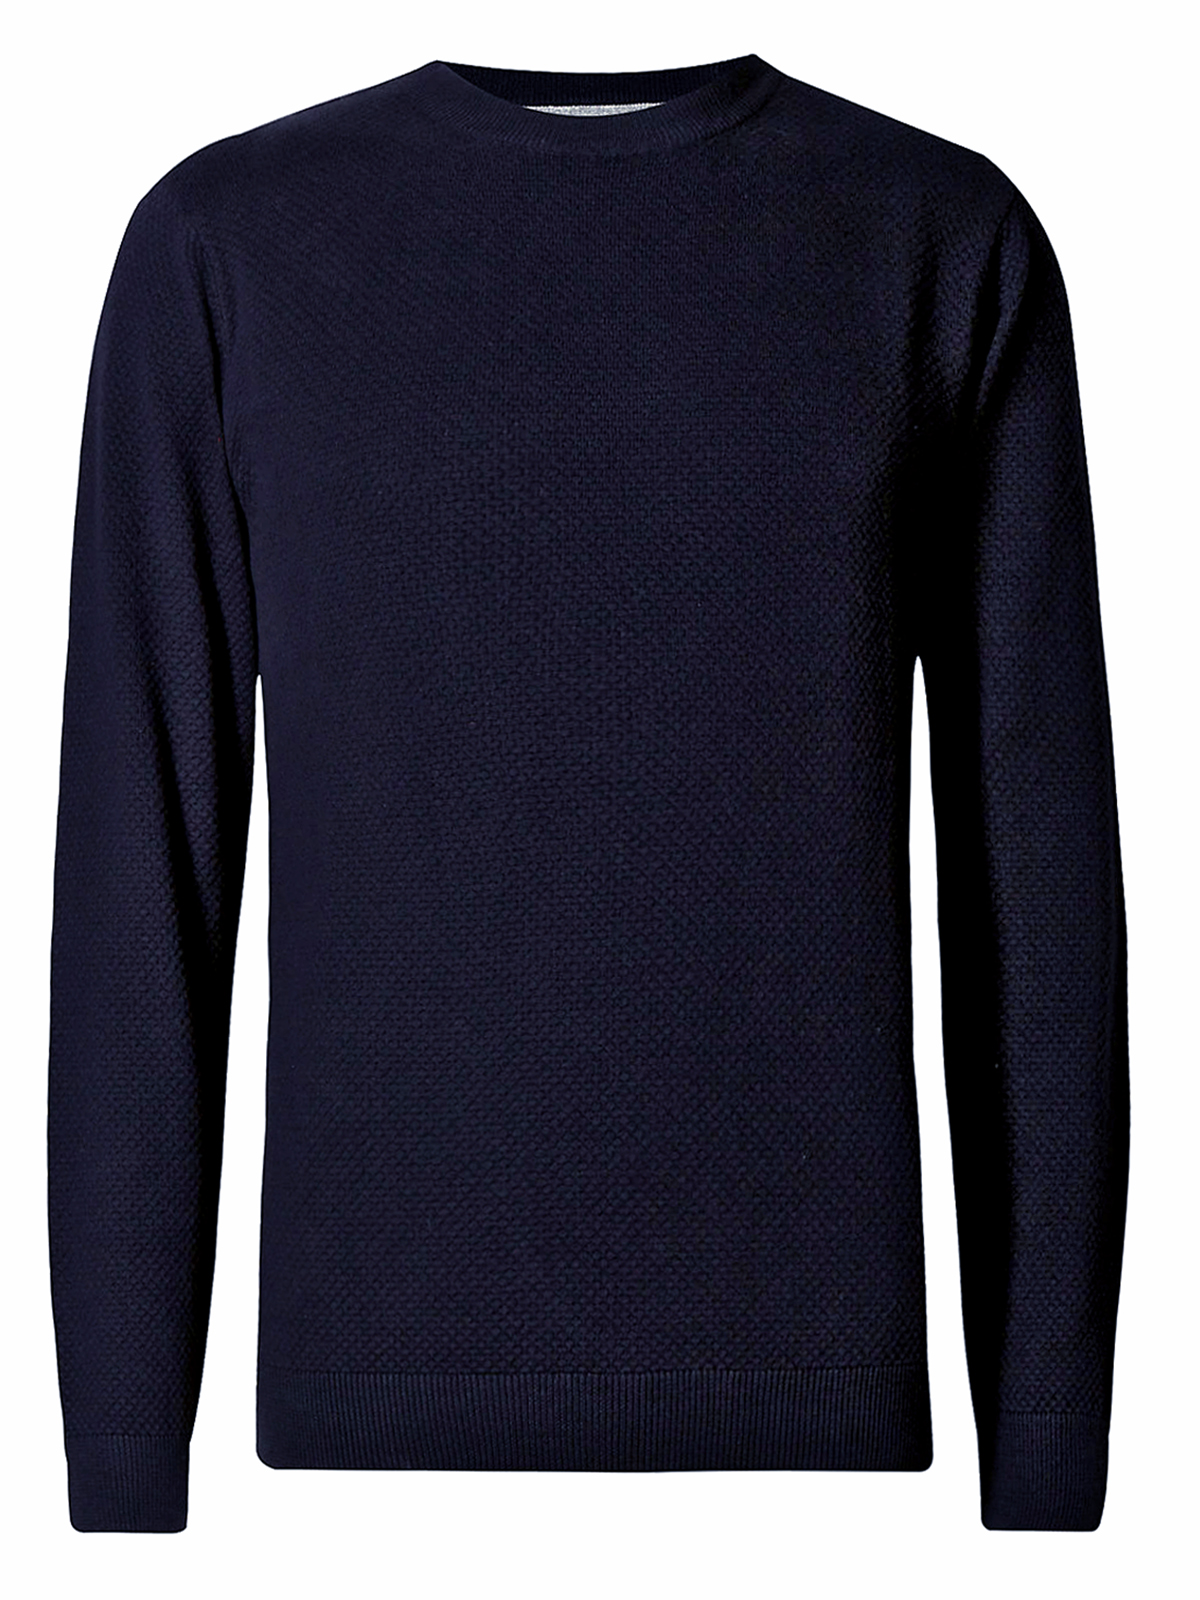 Marks and Spencer - - M&5 NAVY Pure Cotton Textured Jumper - Size Small ...